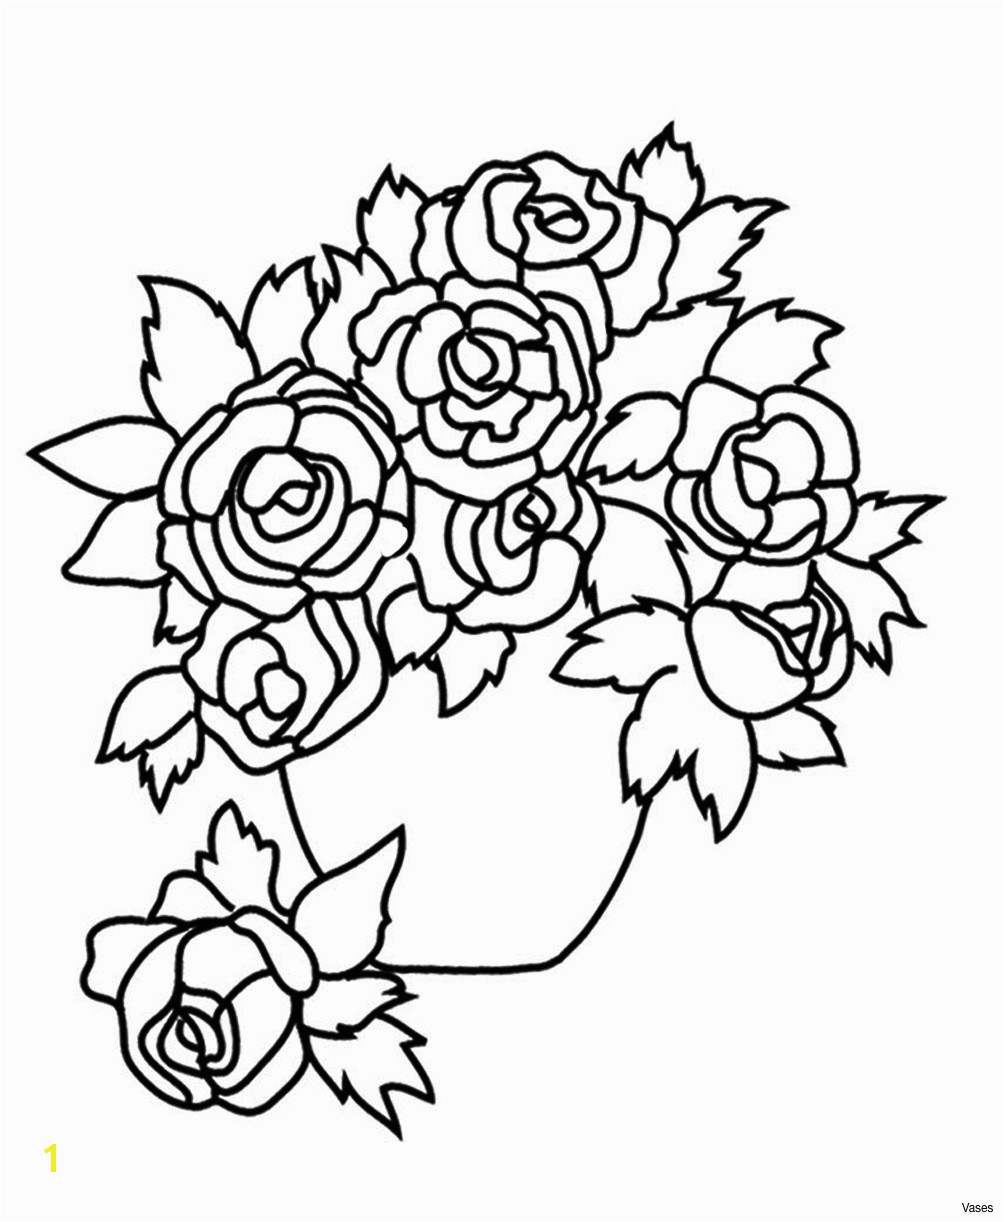 Coloring Book Flowers New Coloring Book Image New Sol R Coloring Pages Best 0d